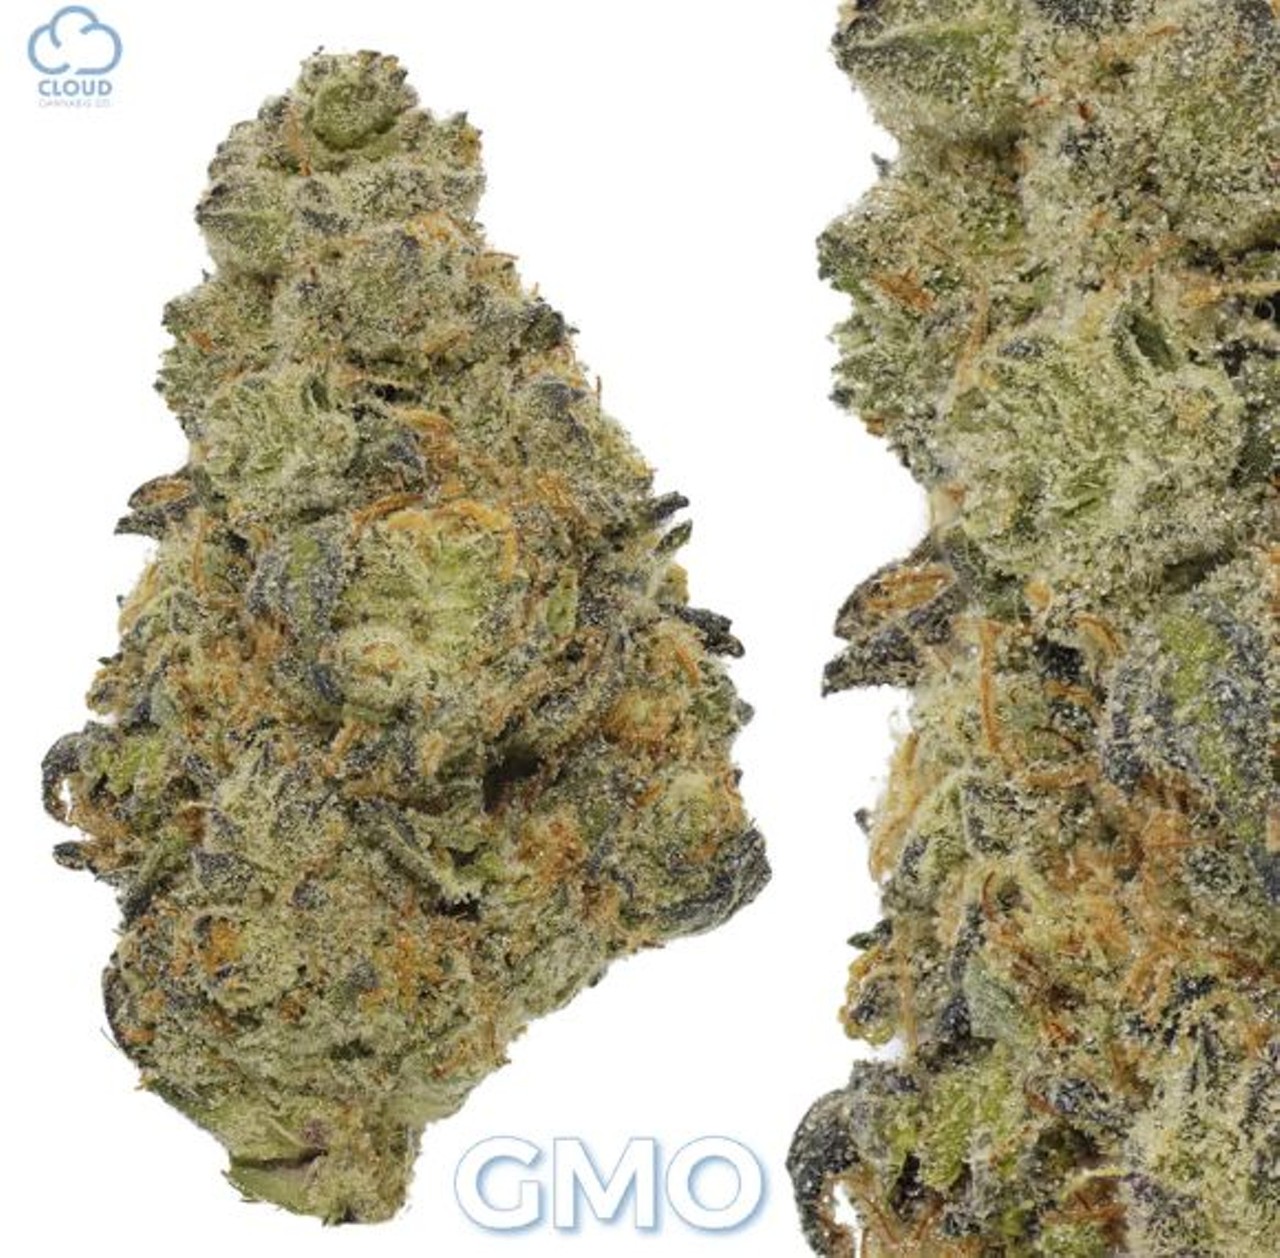 Strains (Flower) 
For the canna-sseur:
GMO Cookies, $20 per gram
Cloud Cannabis, 1760 Plymouth Rd., Ann Arbor; 734-619-1204; cloudcannabis.com
When it comes to understanding marijuana strains, one must respect the percentages associated with strains, because that will determine whether you're going to work high or calling in because you can't discern your face from a mountain. Wait, what? Anyway, canna-sseurs know what they can handle, and it&#146;s likely they can handle a lot of THC &#151; like, 31.5% THC, as provided by GMO Cookies. GMO Cookies, which has nothing to do with genetically modified anything, is a top-shelf cross between Chemdawg D and GSC (Girl Scout Cookies). The result? An uplifting and relaxing 31.5% high. For the newbies wondering, is 31.5% a lot? Trust us. It is. 
Photo via Weedmaps